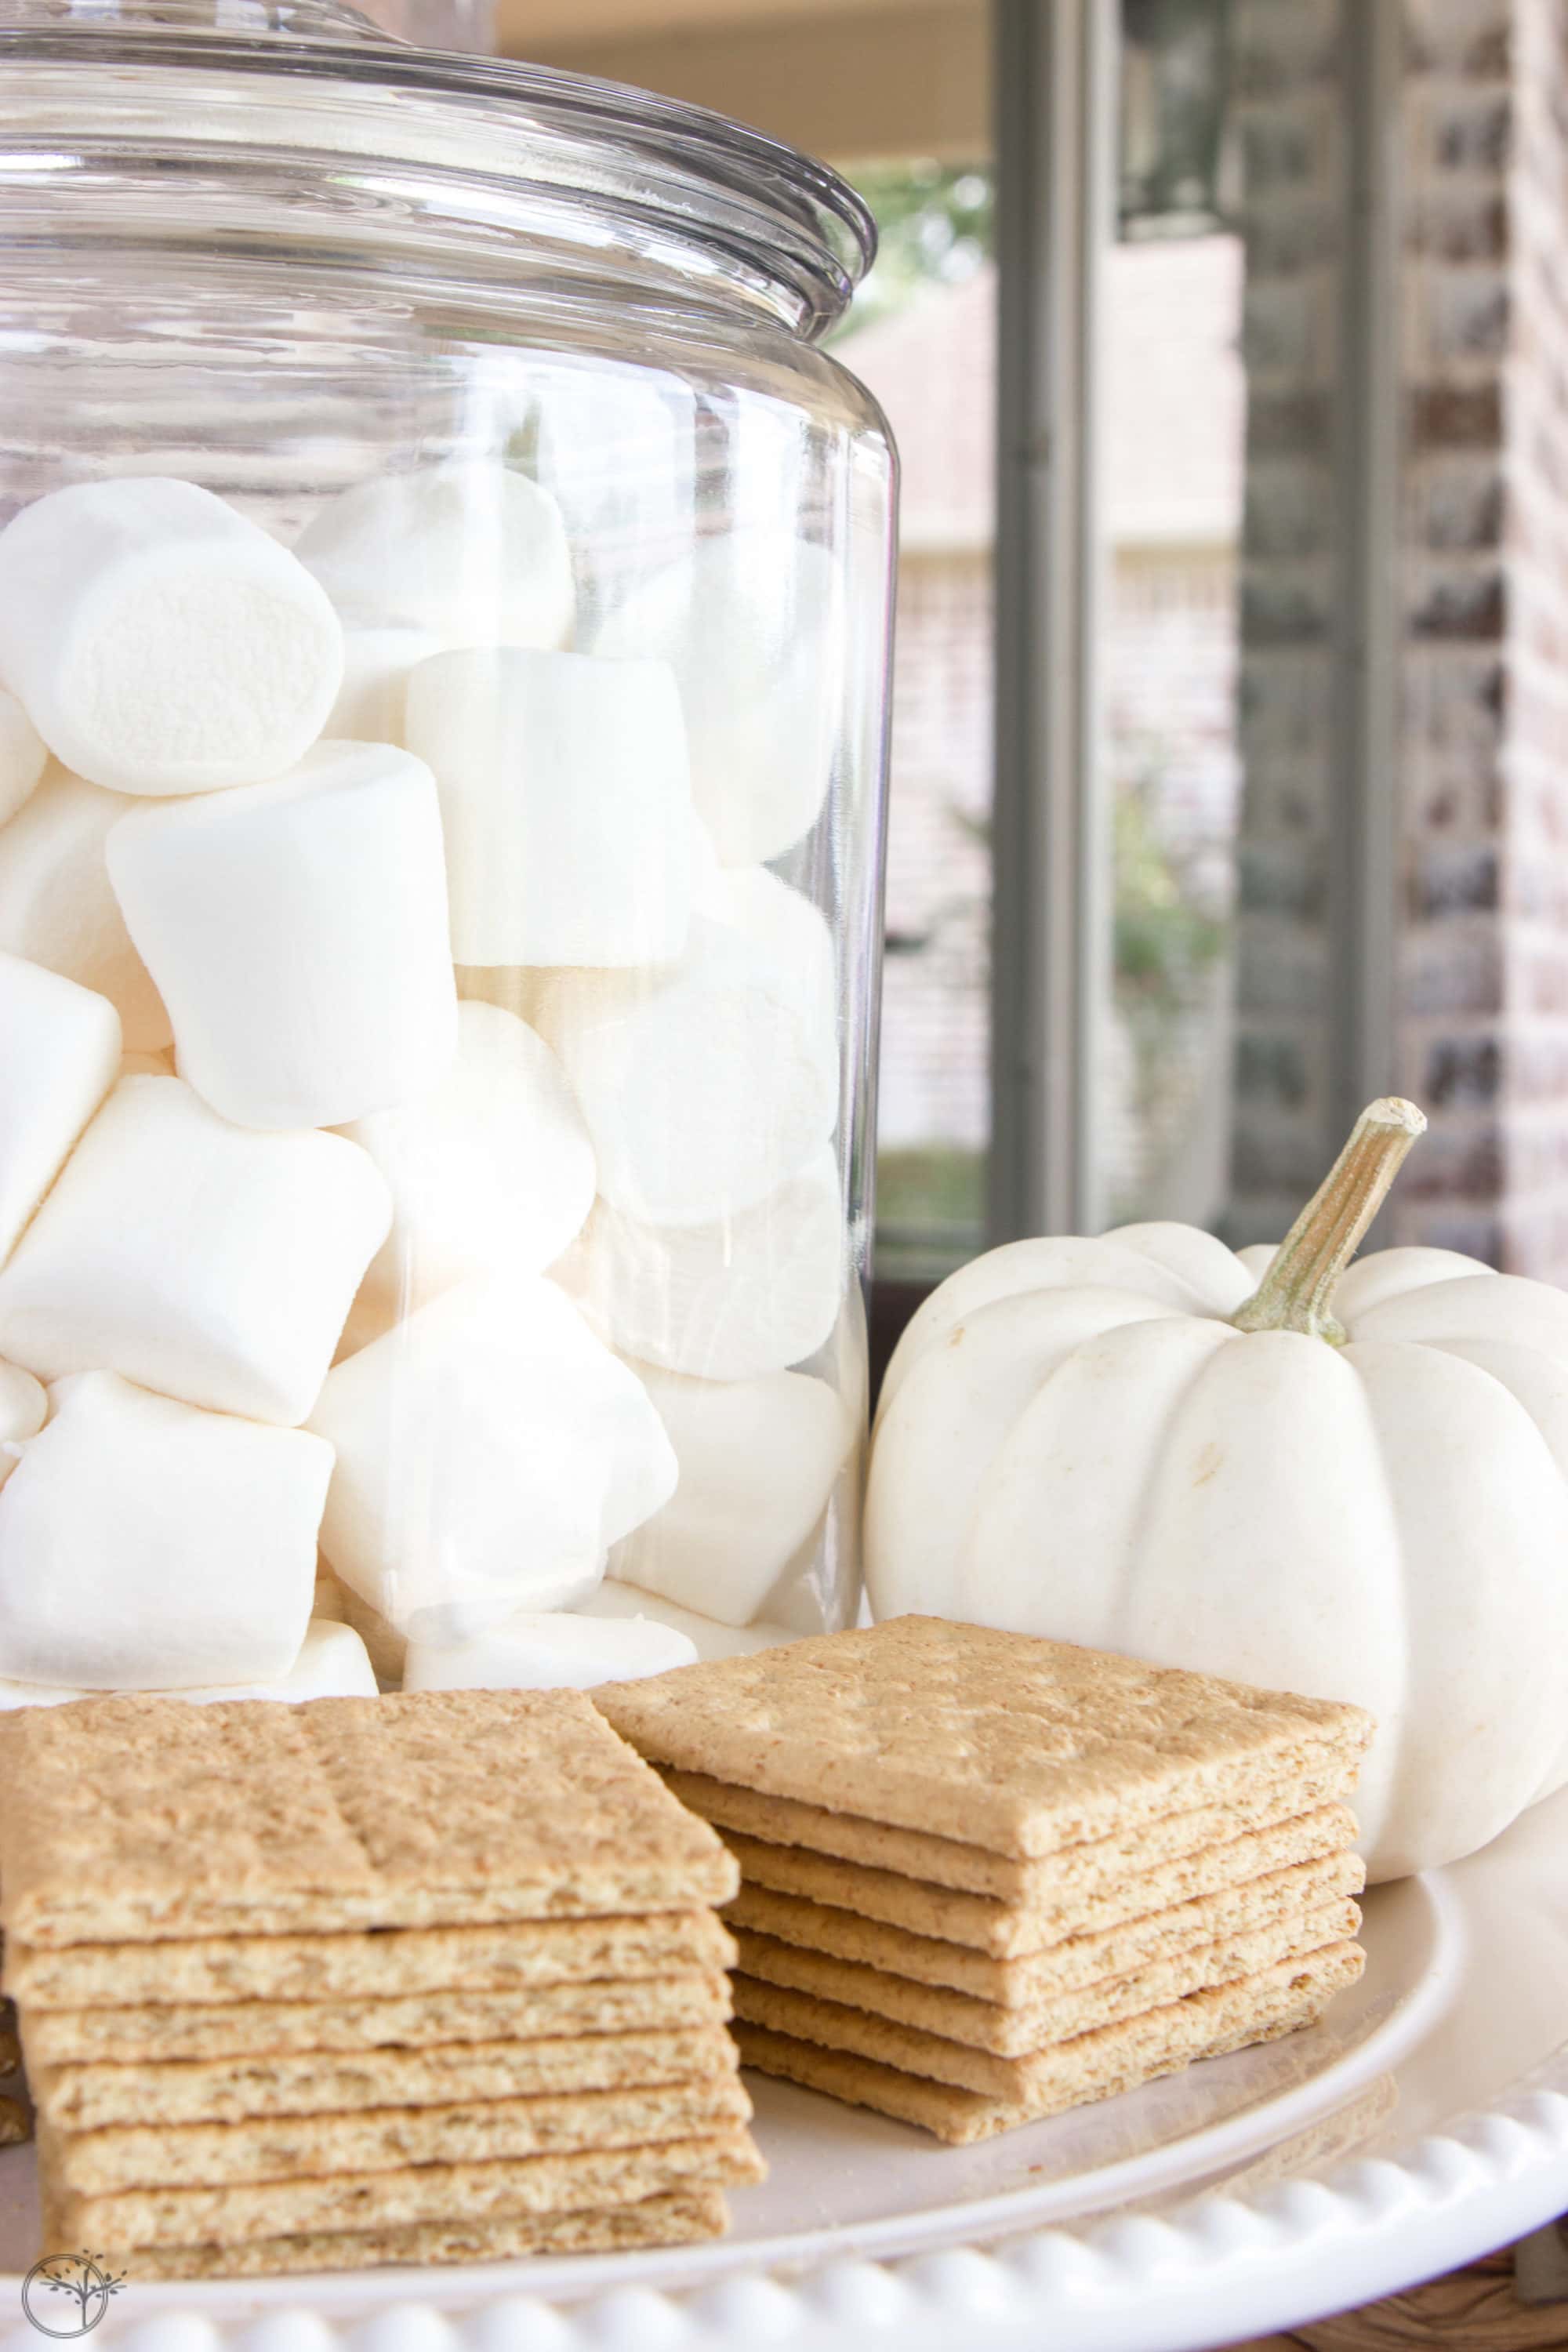 An outdoor s'mores bar cart is a perfectly unexpected way to gather loved ones together for the fall season. #s'mores #s'moresbarcart #outdoorentertainment #smoresrecipe